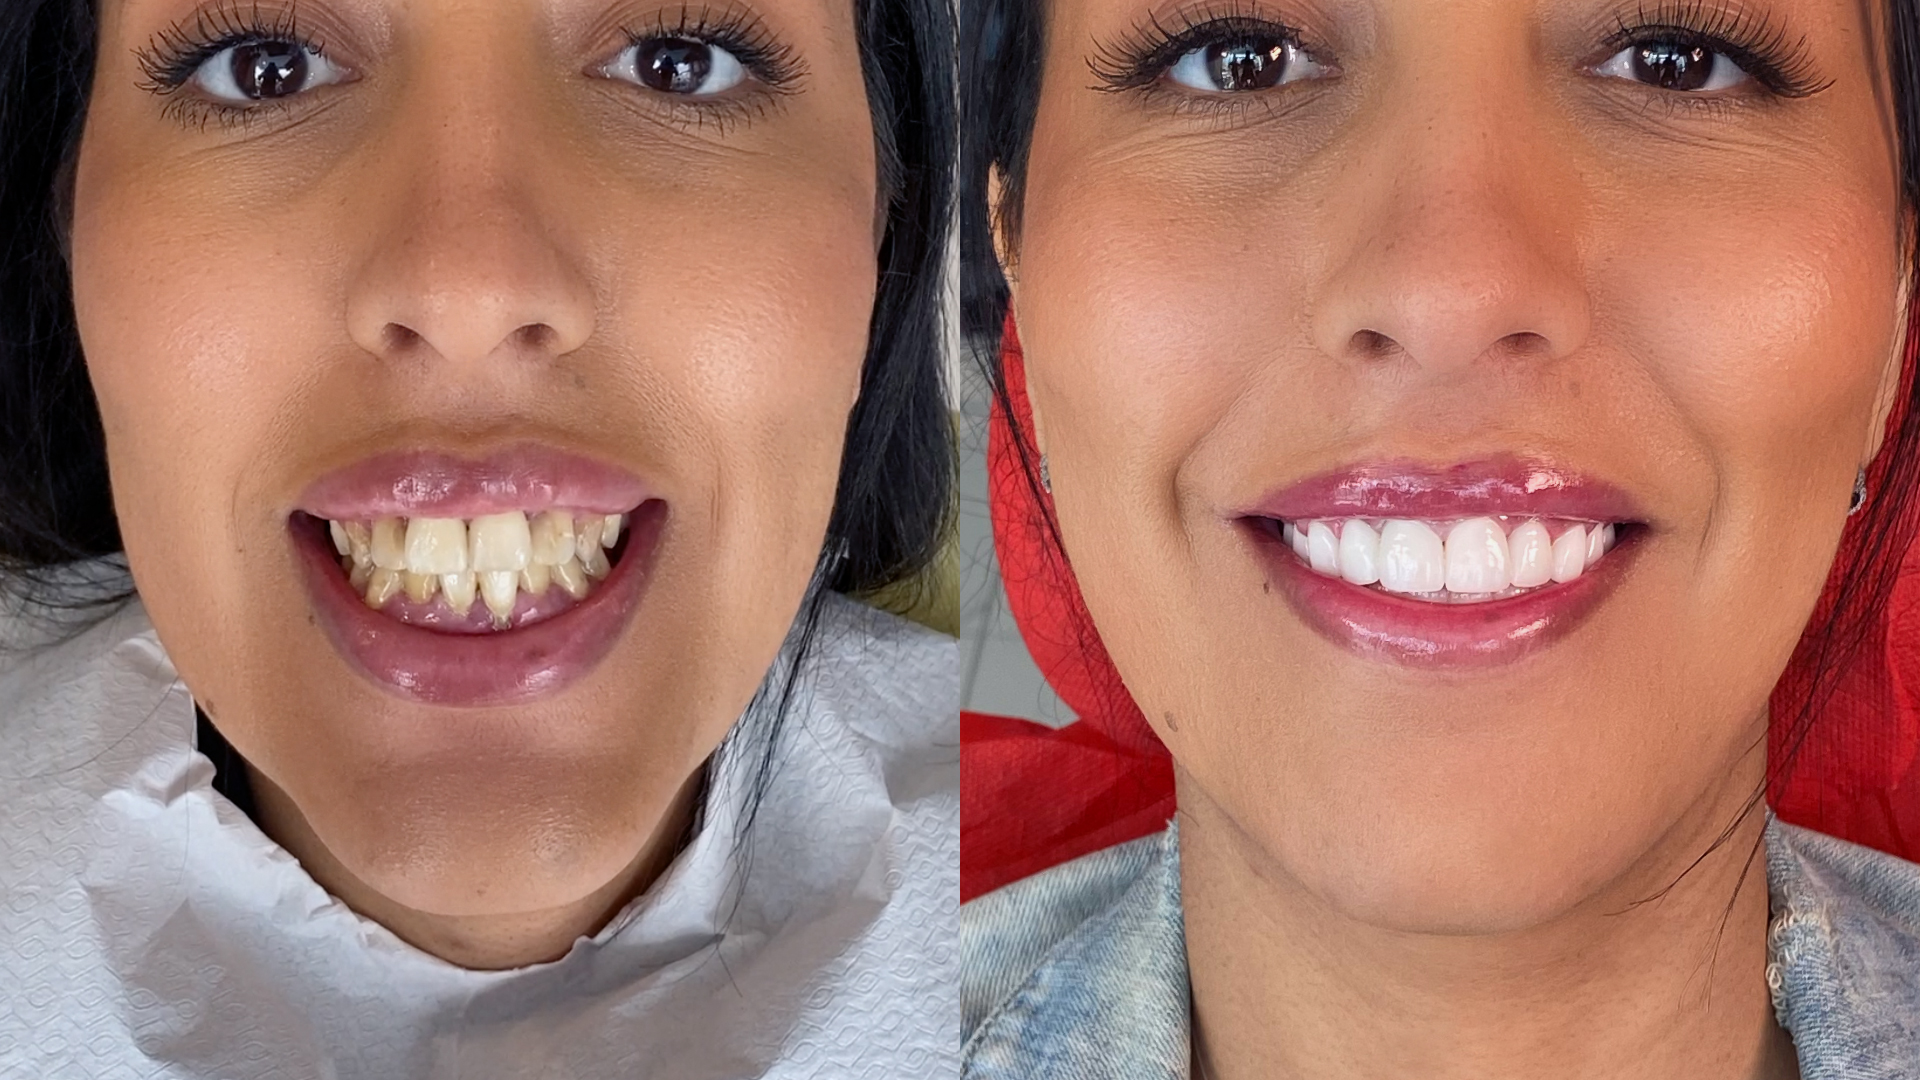 Before and after the placement of dental veneers and other cosmetic surgery interventions